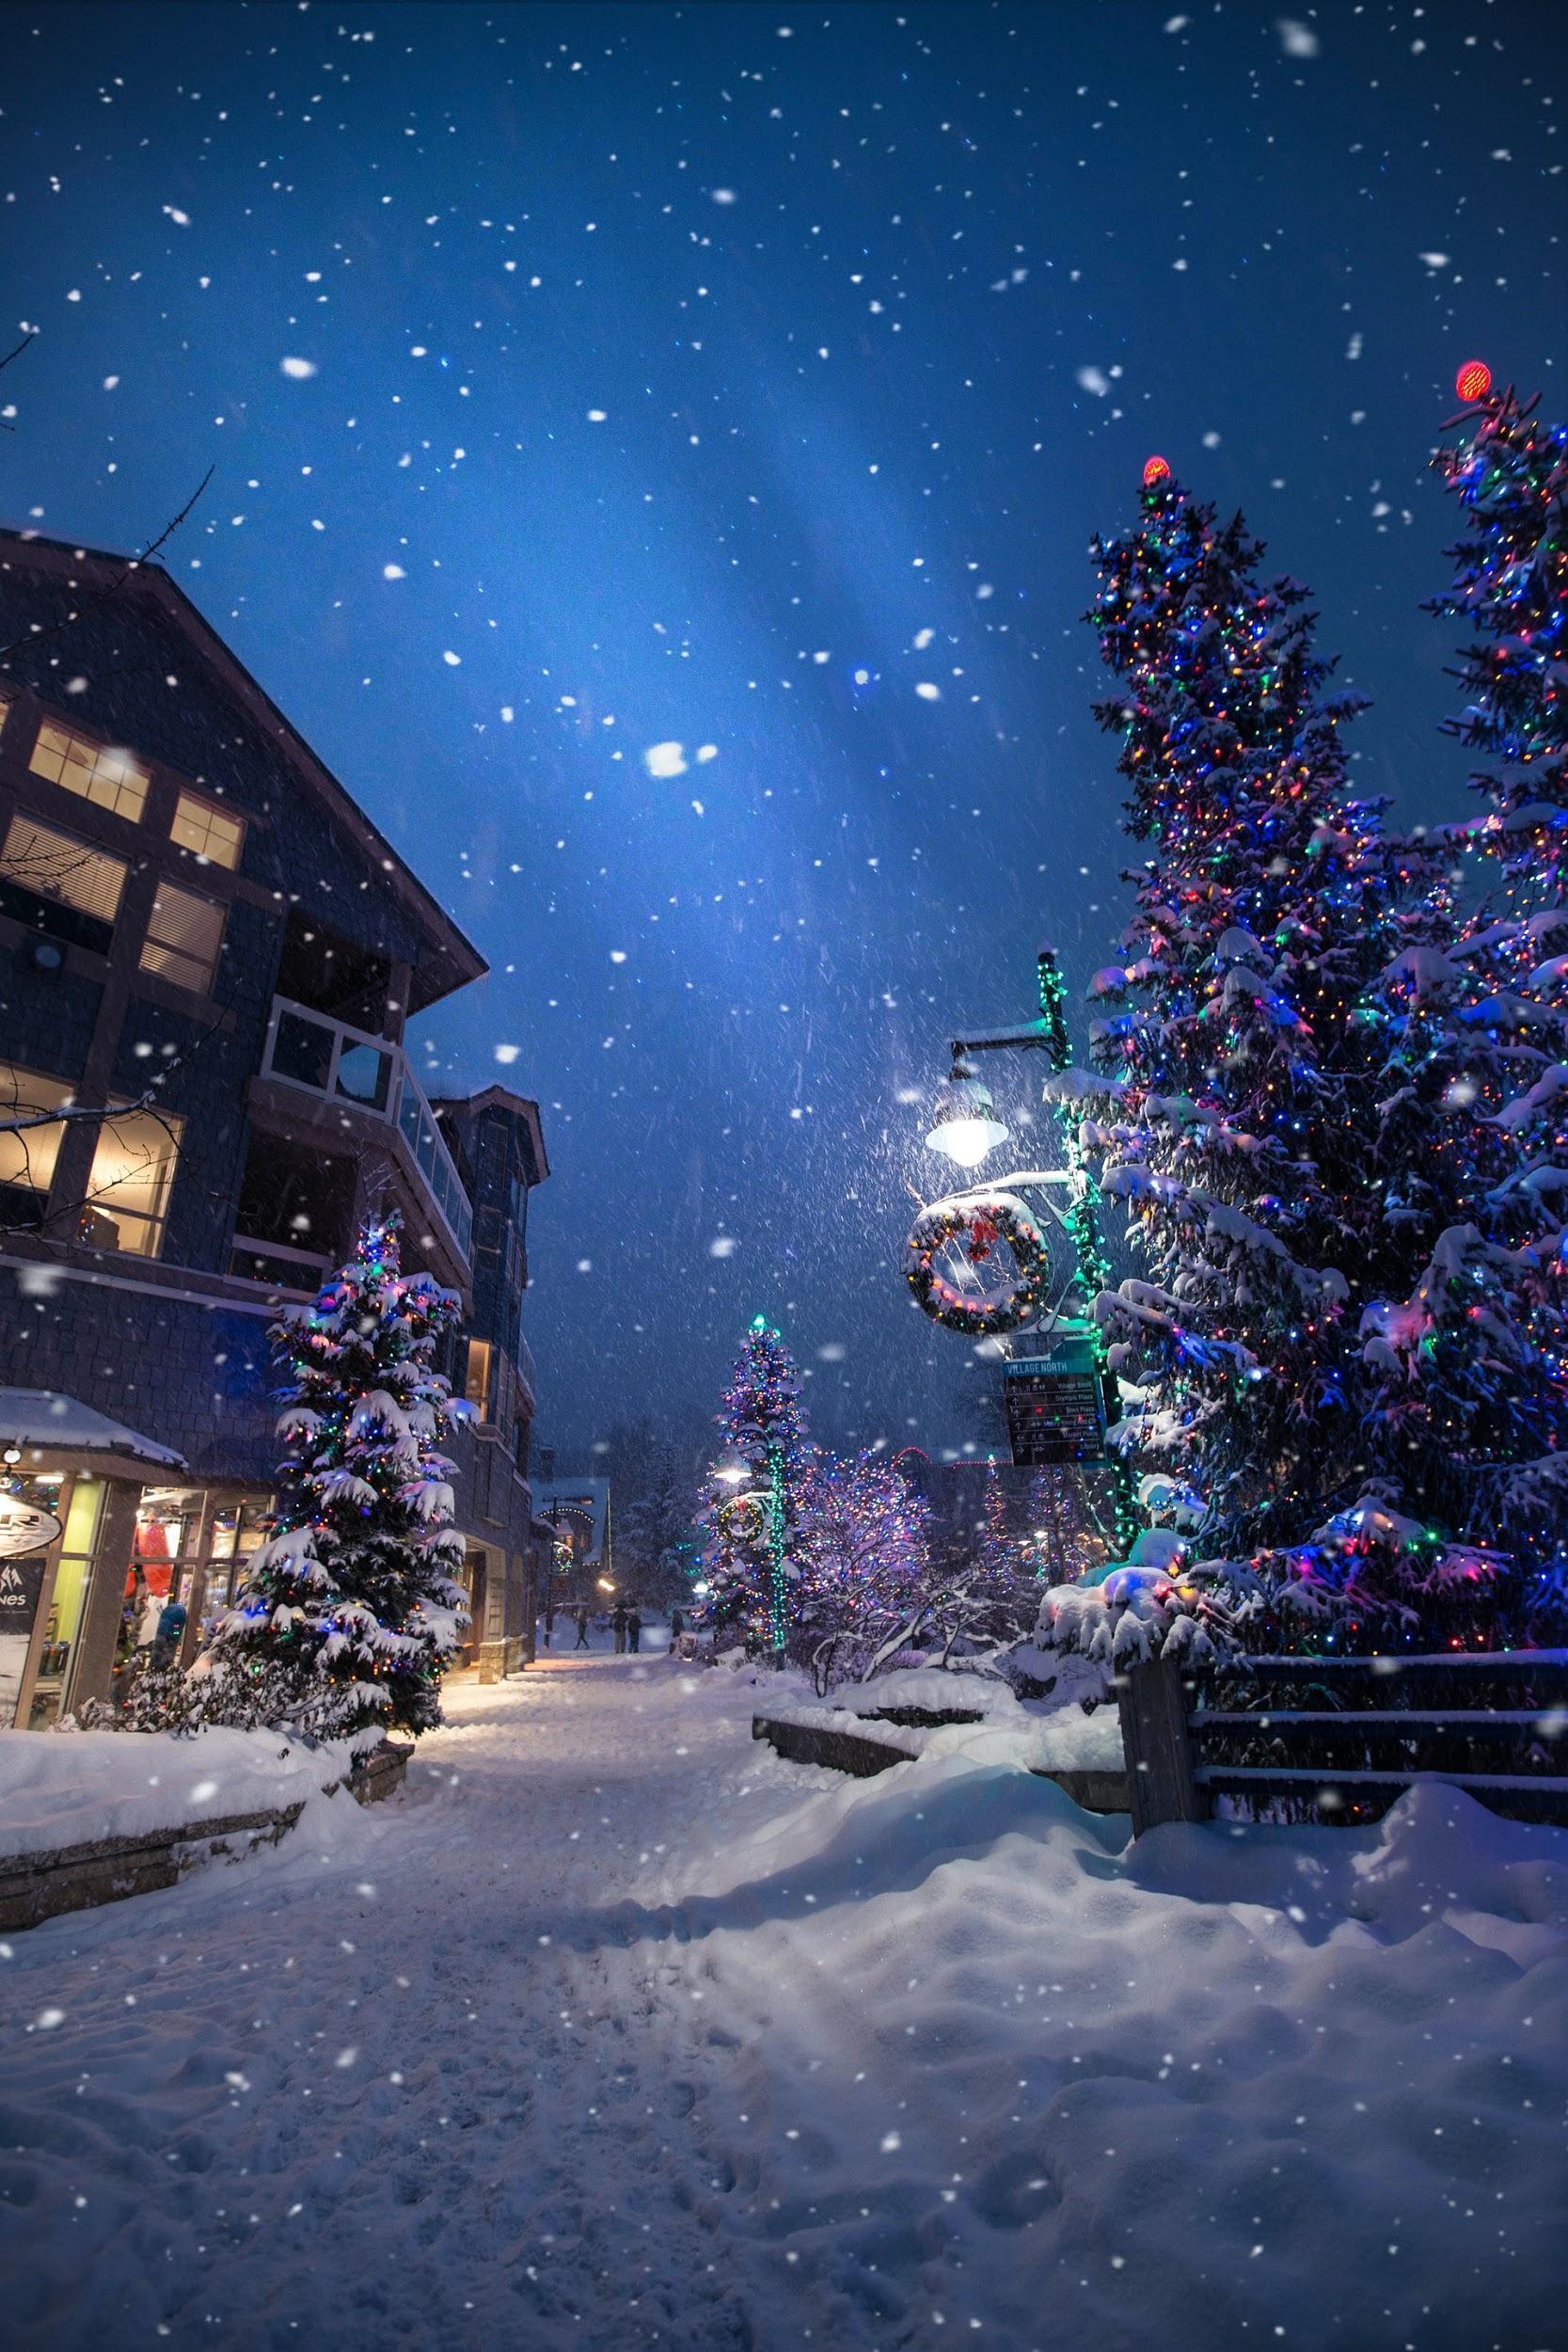 A village lit up with Christmas decorations and snow